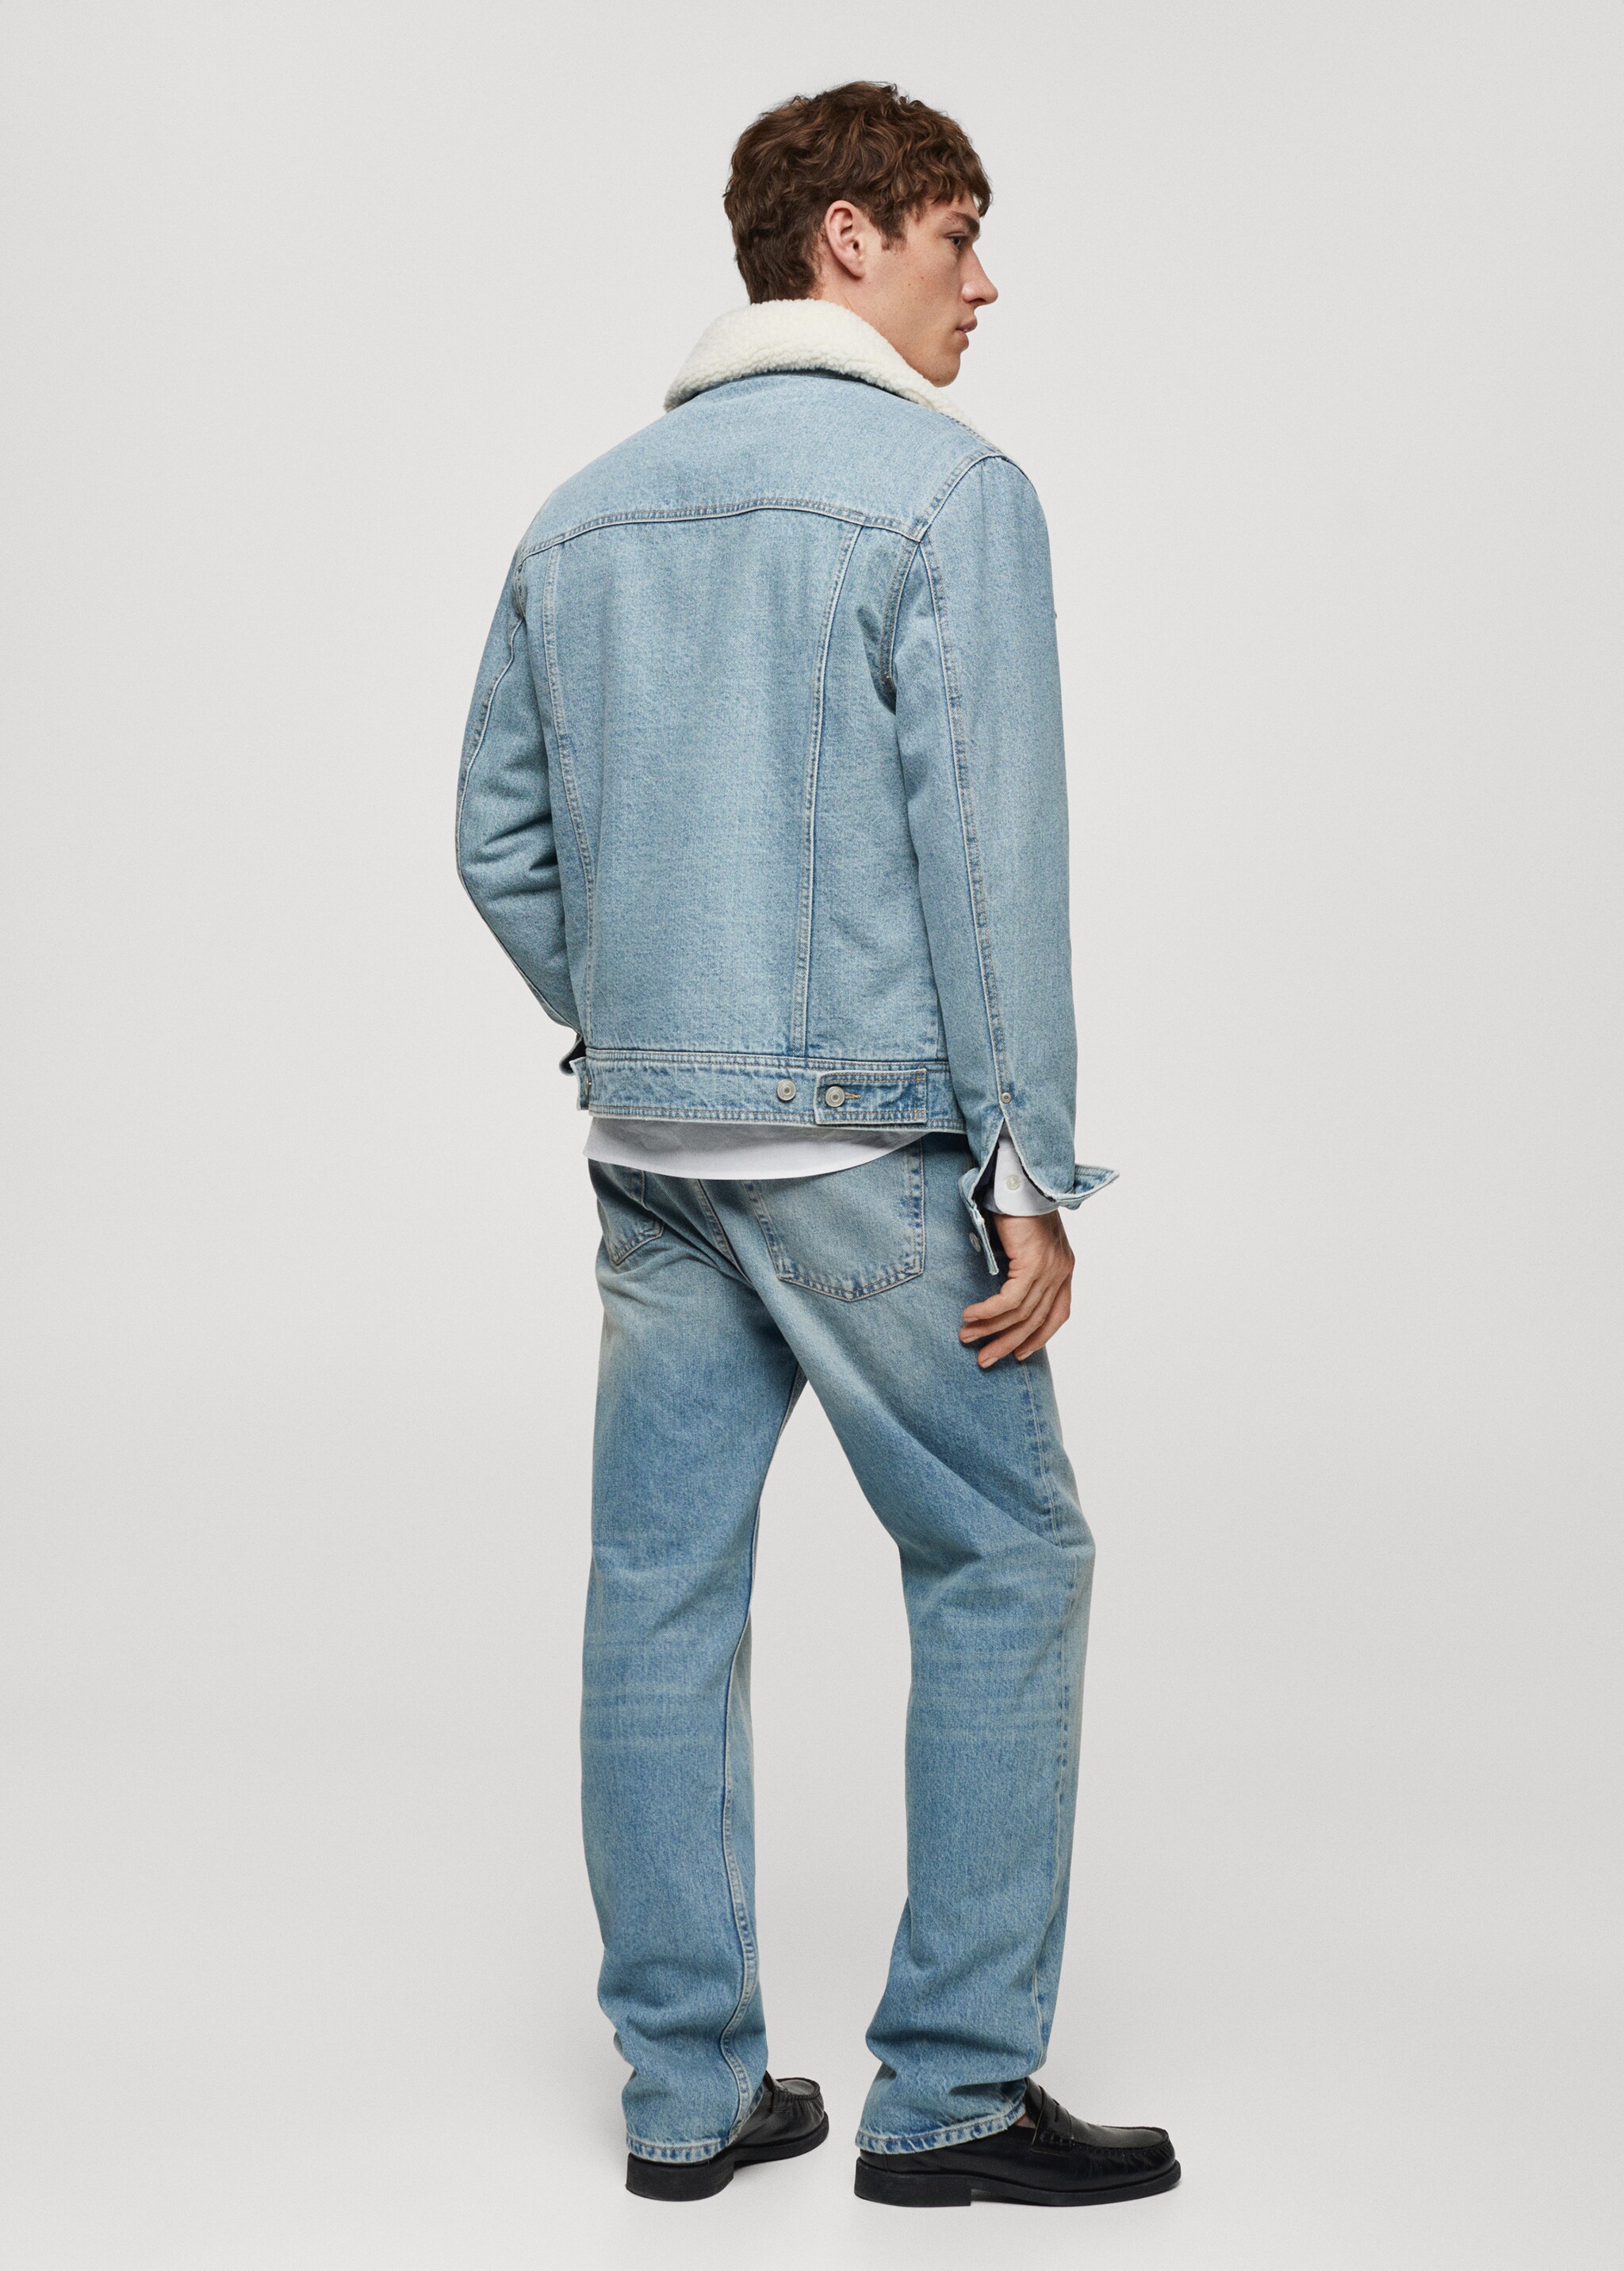 Shearling denim jacket - Reverse of the article